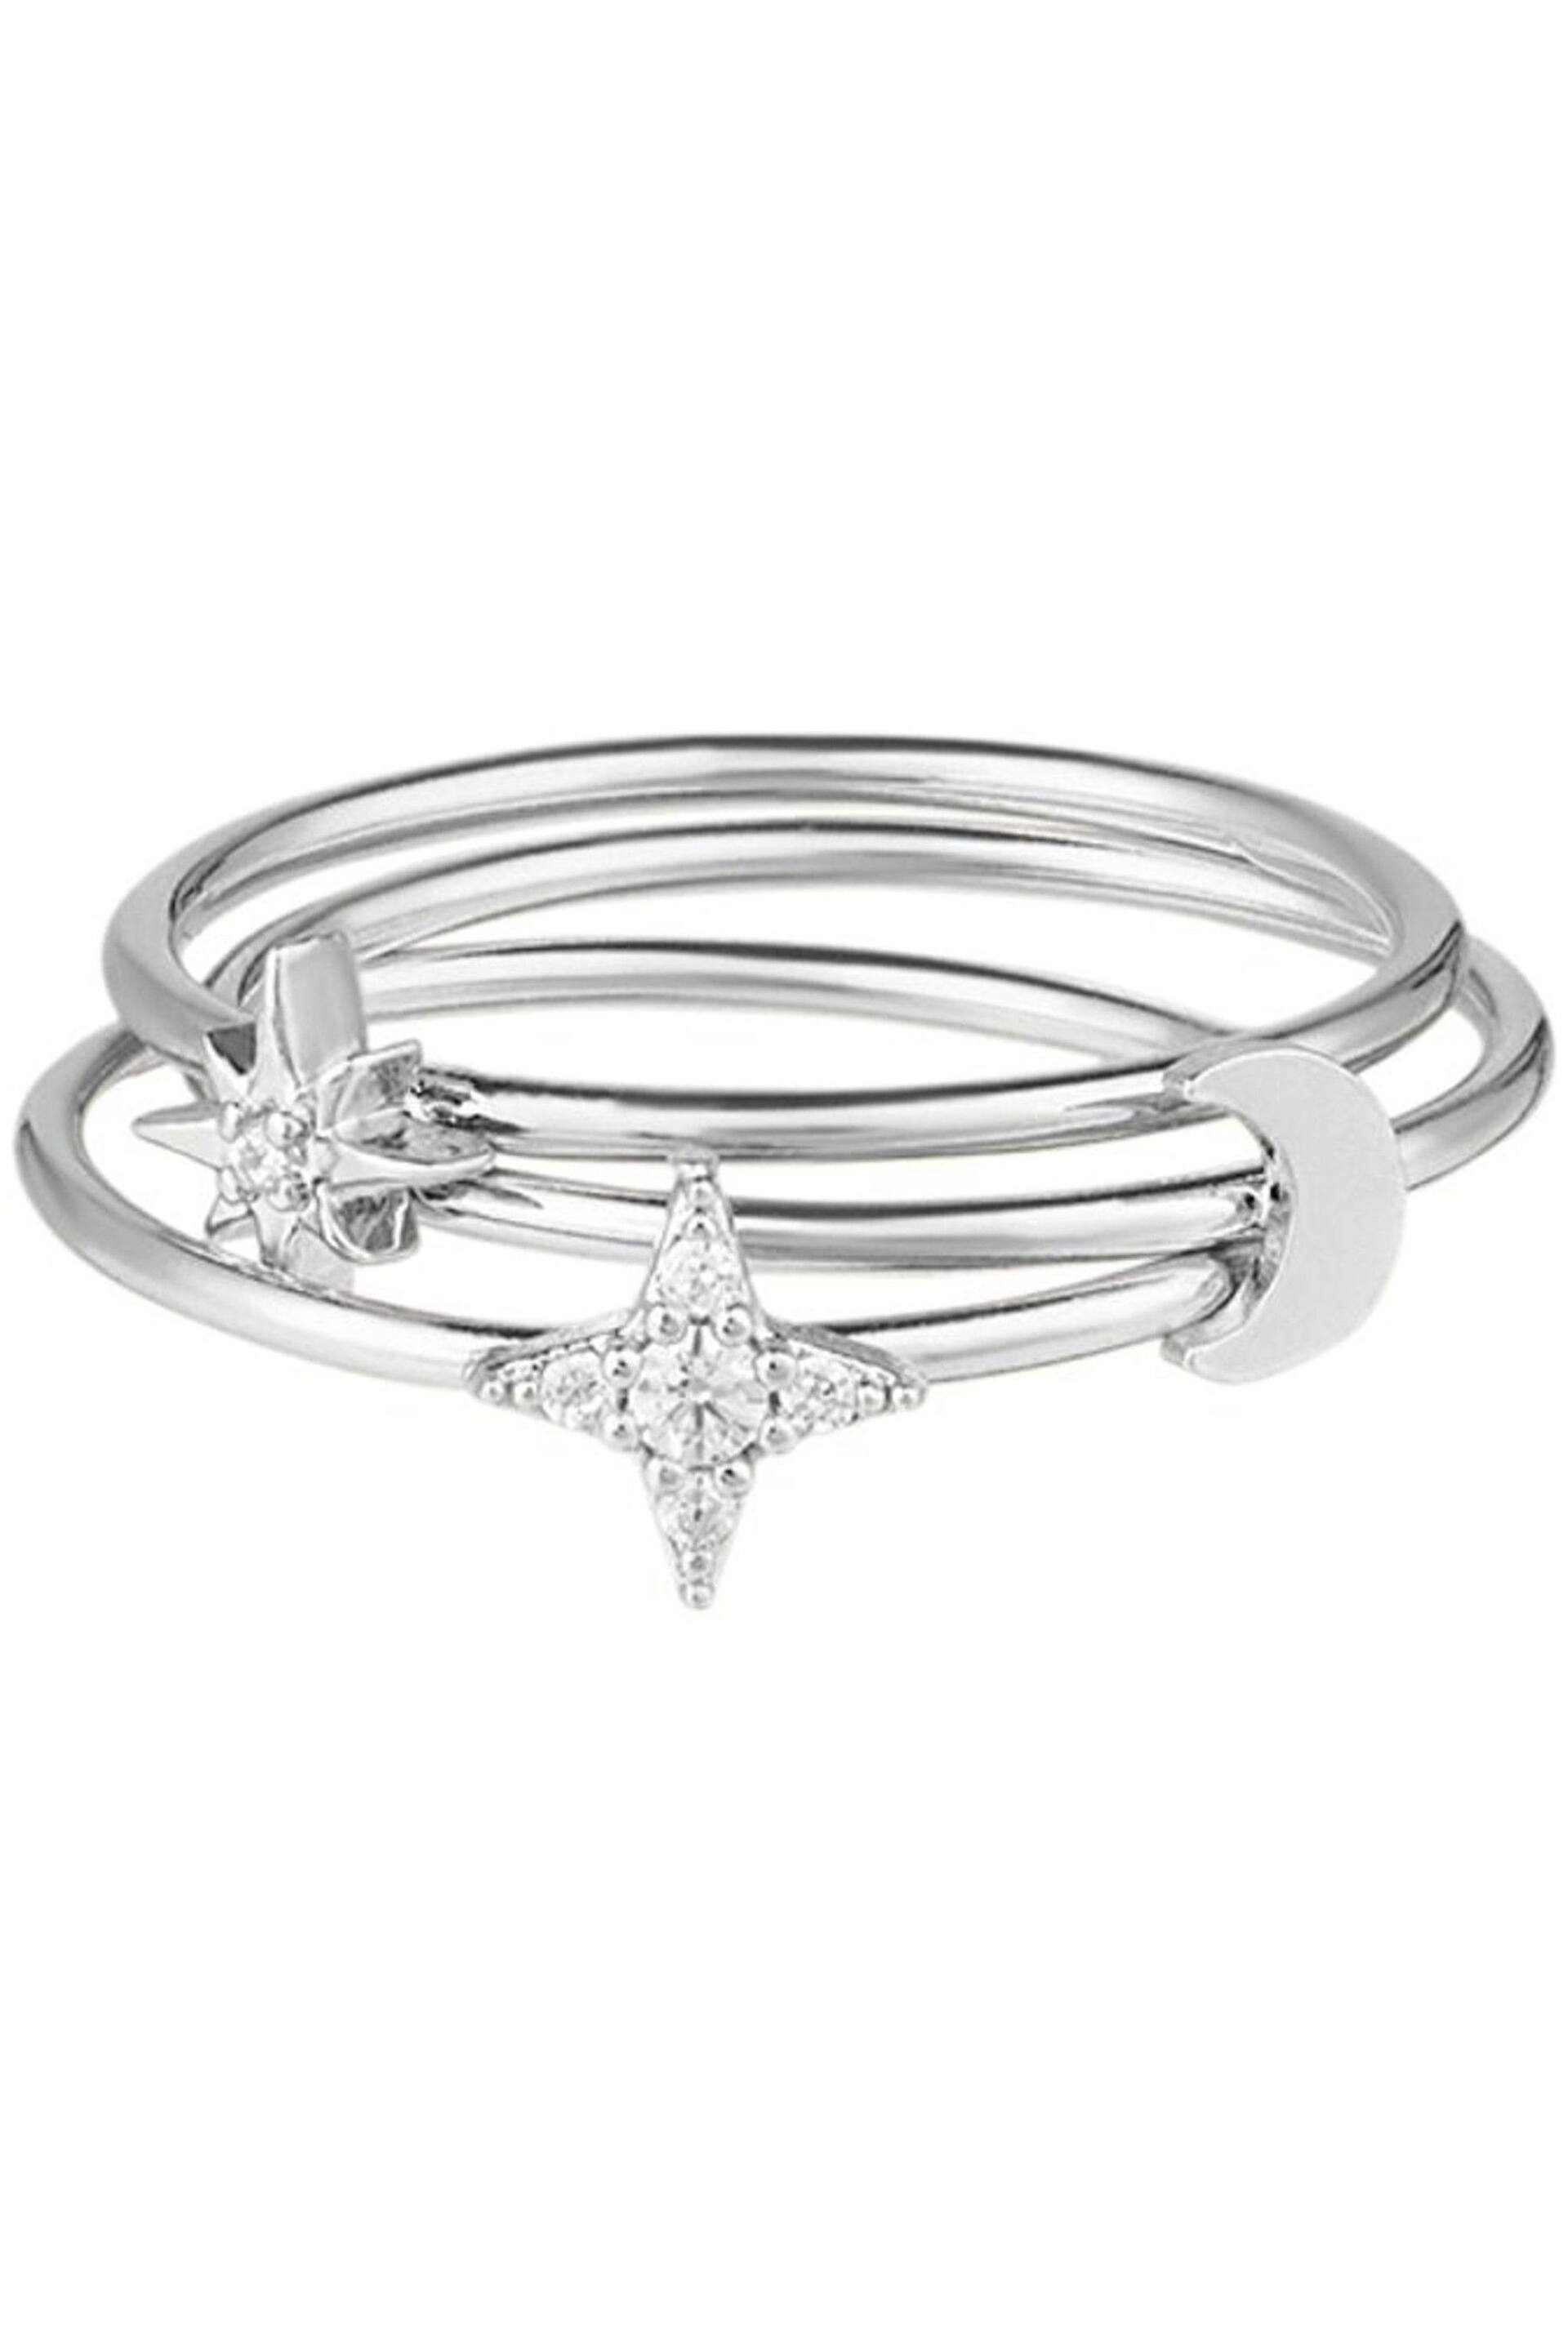 Orelia London Silver Plated Celestial Stacking Rings - Image 2 of 3